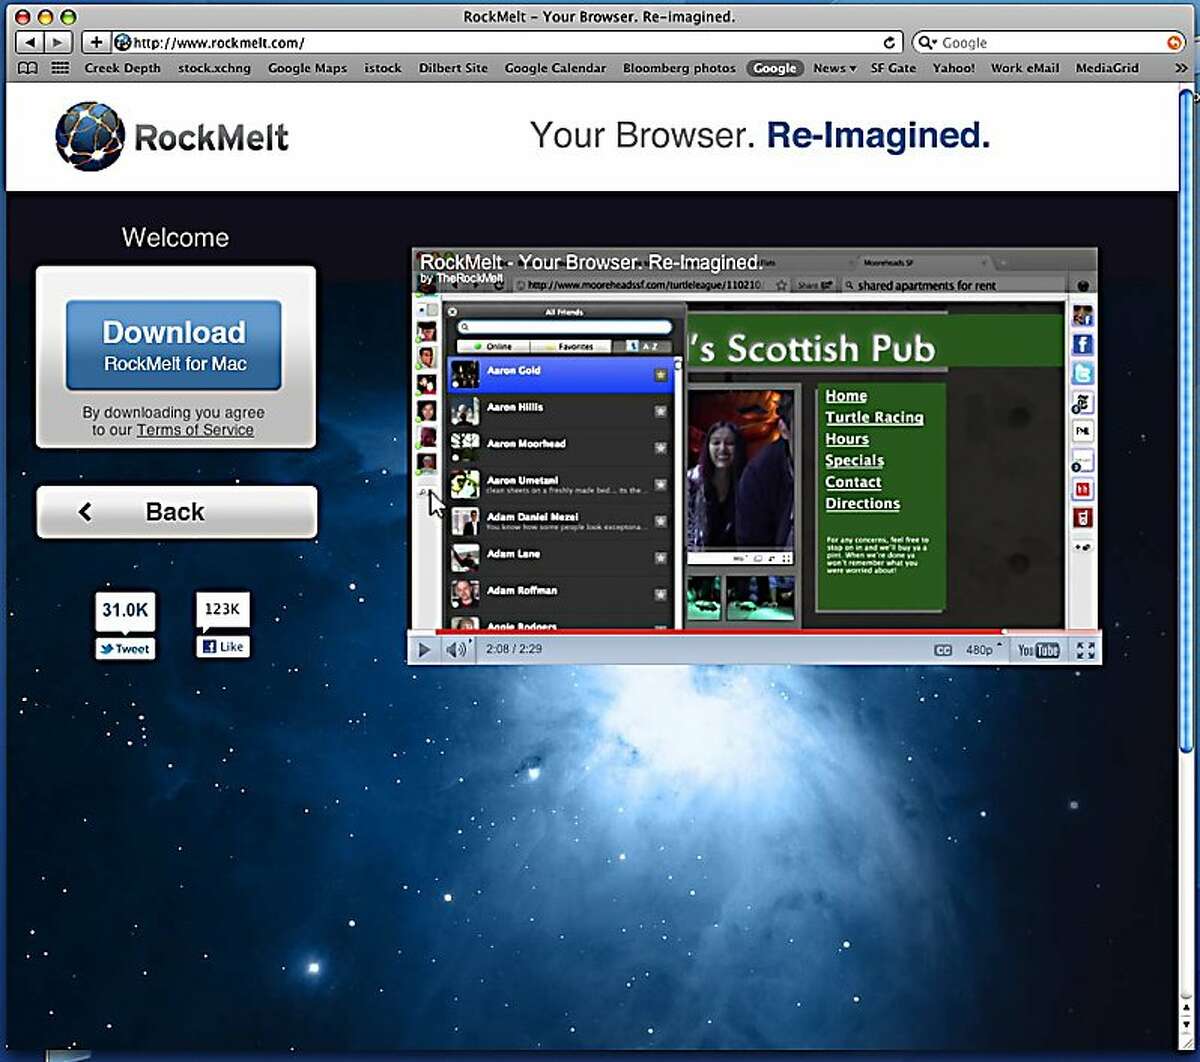 Screenshot from rockmelt.com, a Mountain View company that is launching a social web browser.